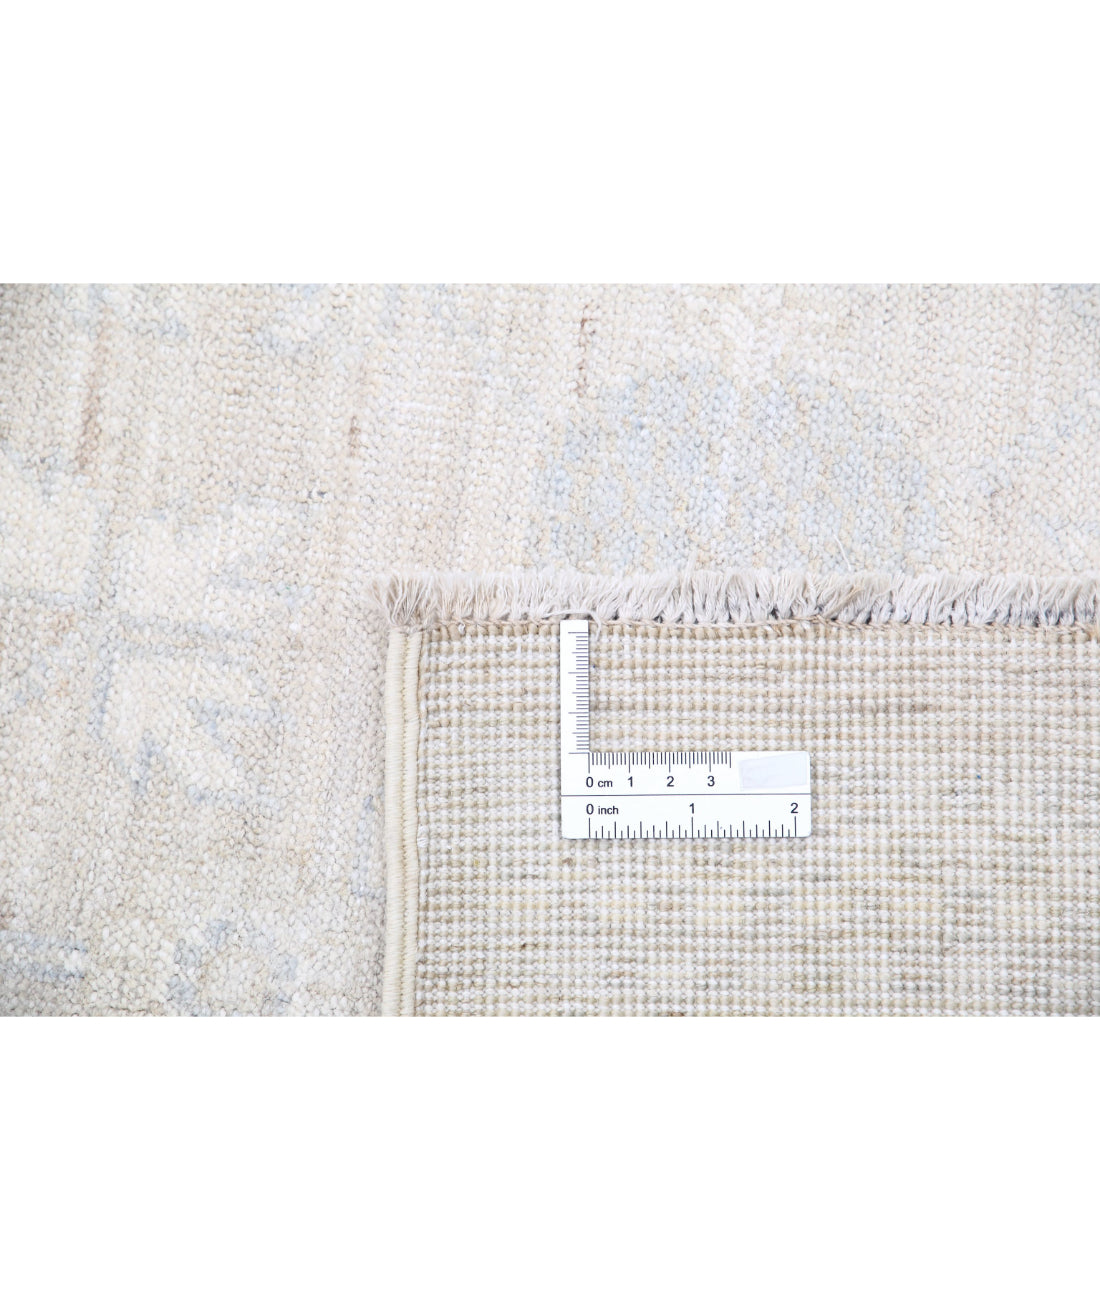 Hand Knotted Khotan Wool Rug - 7'11'' x 9'10'' 7'11'' x 9'10'' (238 X 295) / Ivory / Taupe